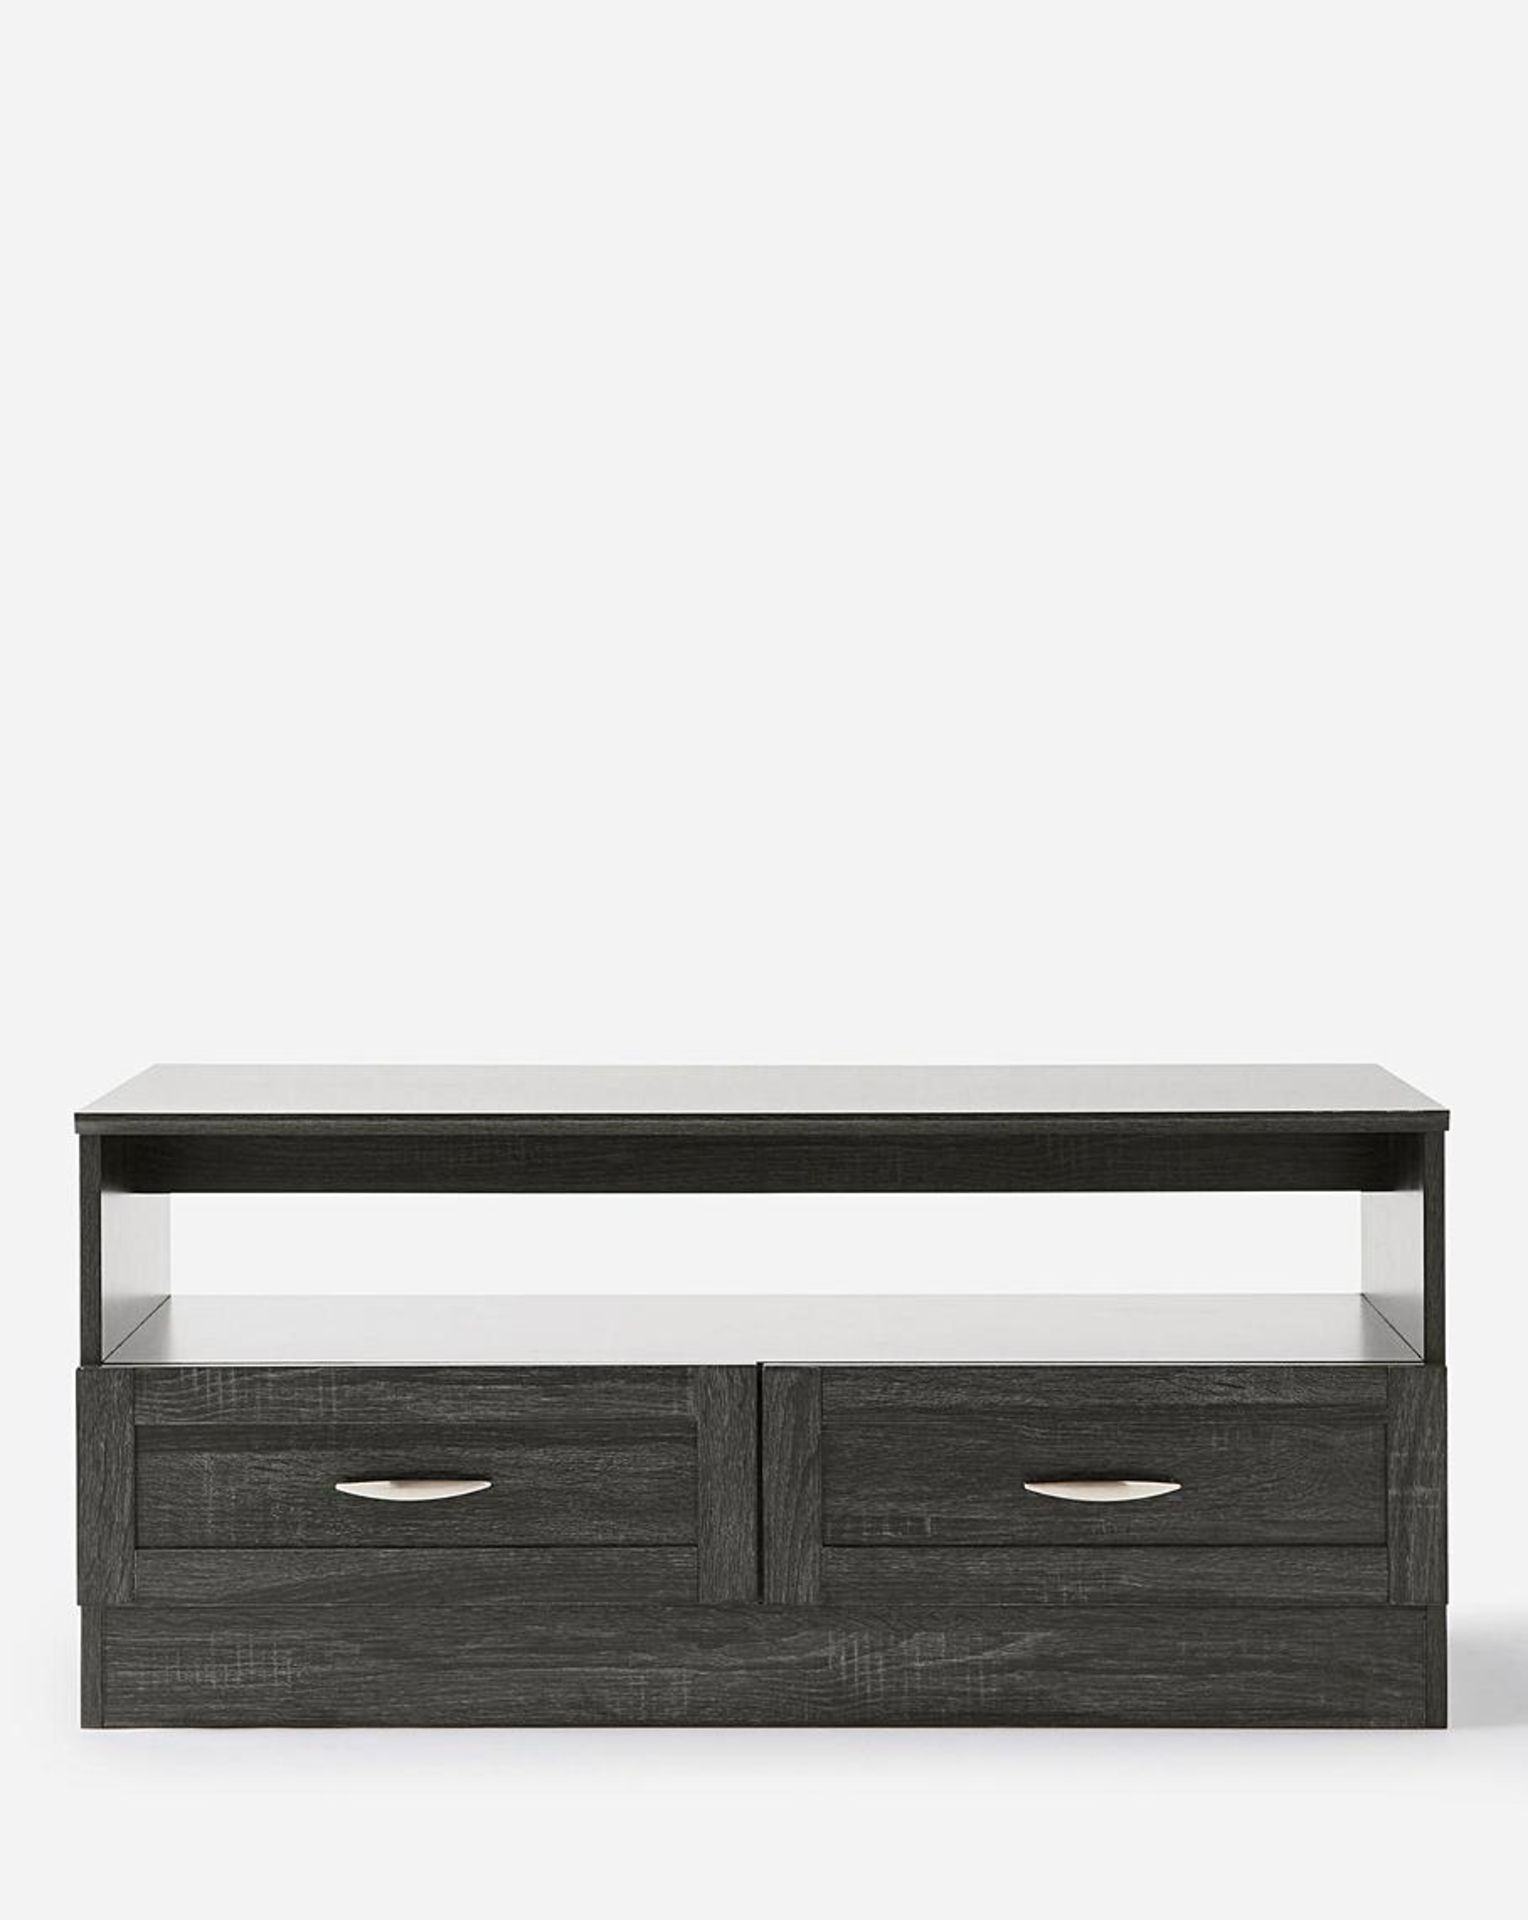 Kingston Storage Coffee Table. SR4. The natural looking distressed grain finish gives this range the